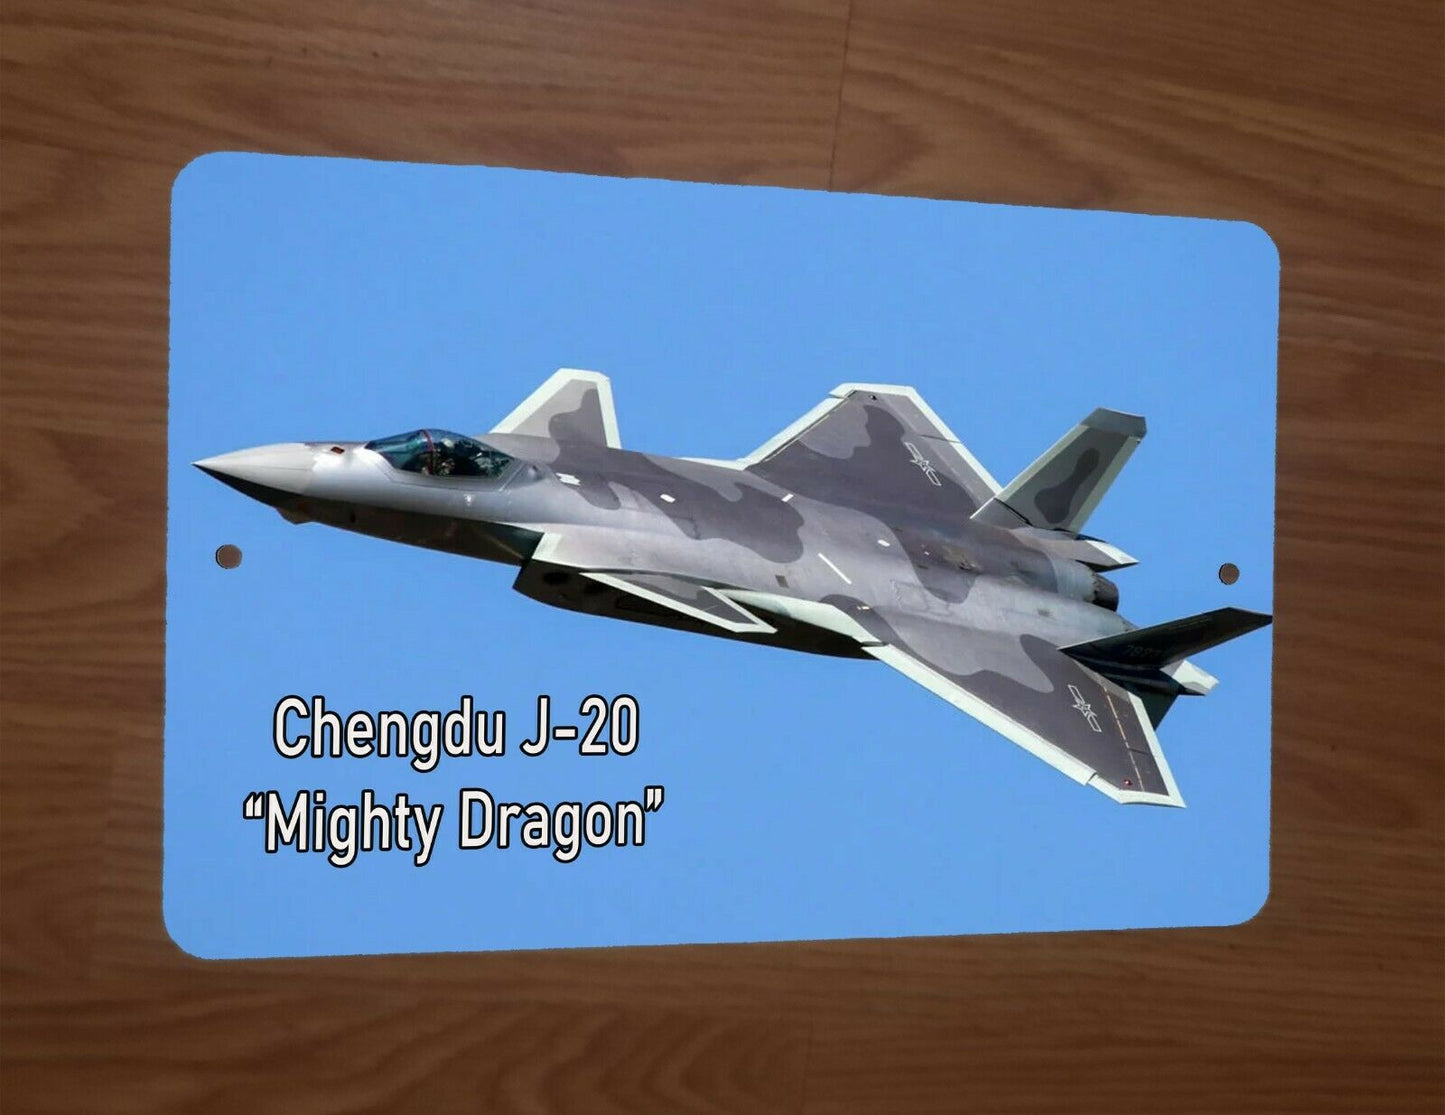 Chengdu J-20 Mighty Dragon Military Twinjet Stealth Jet Fighter 8x12 Metal Sign